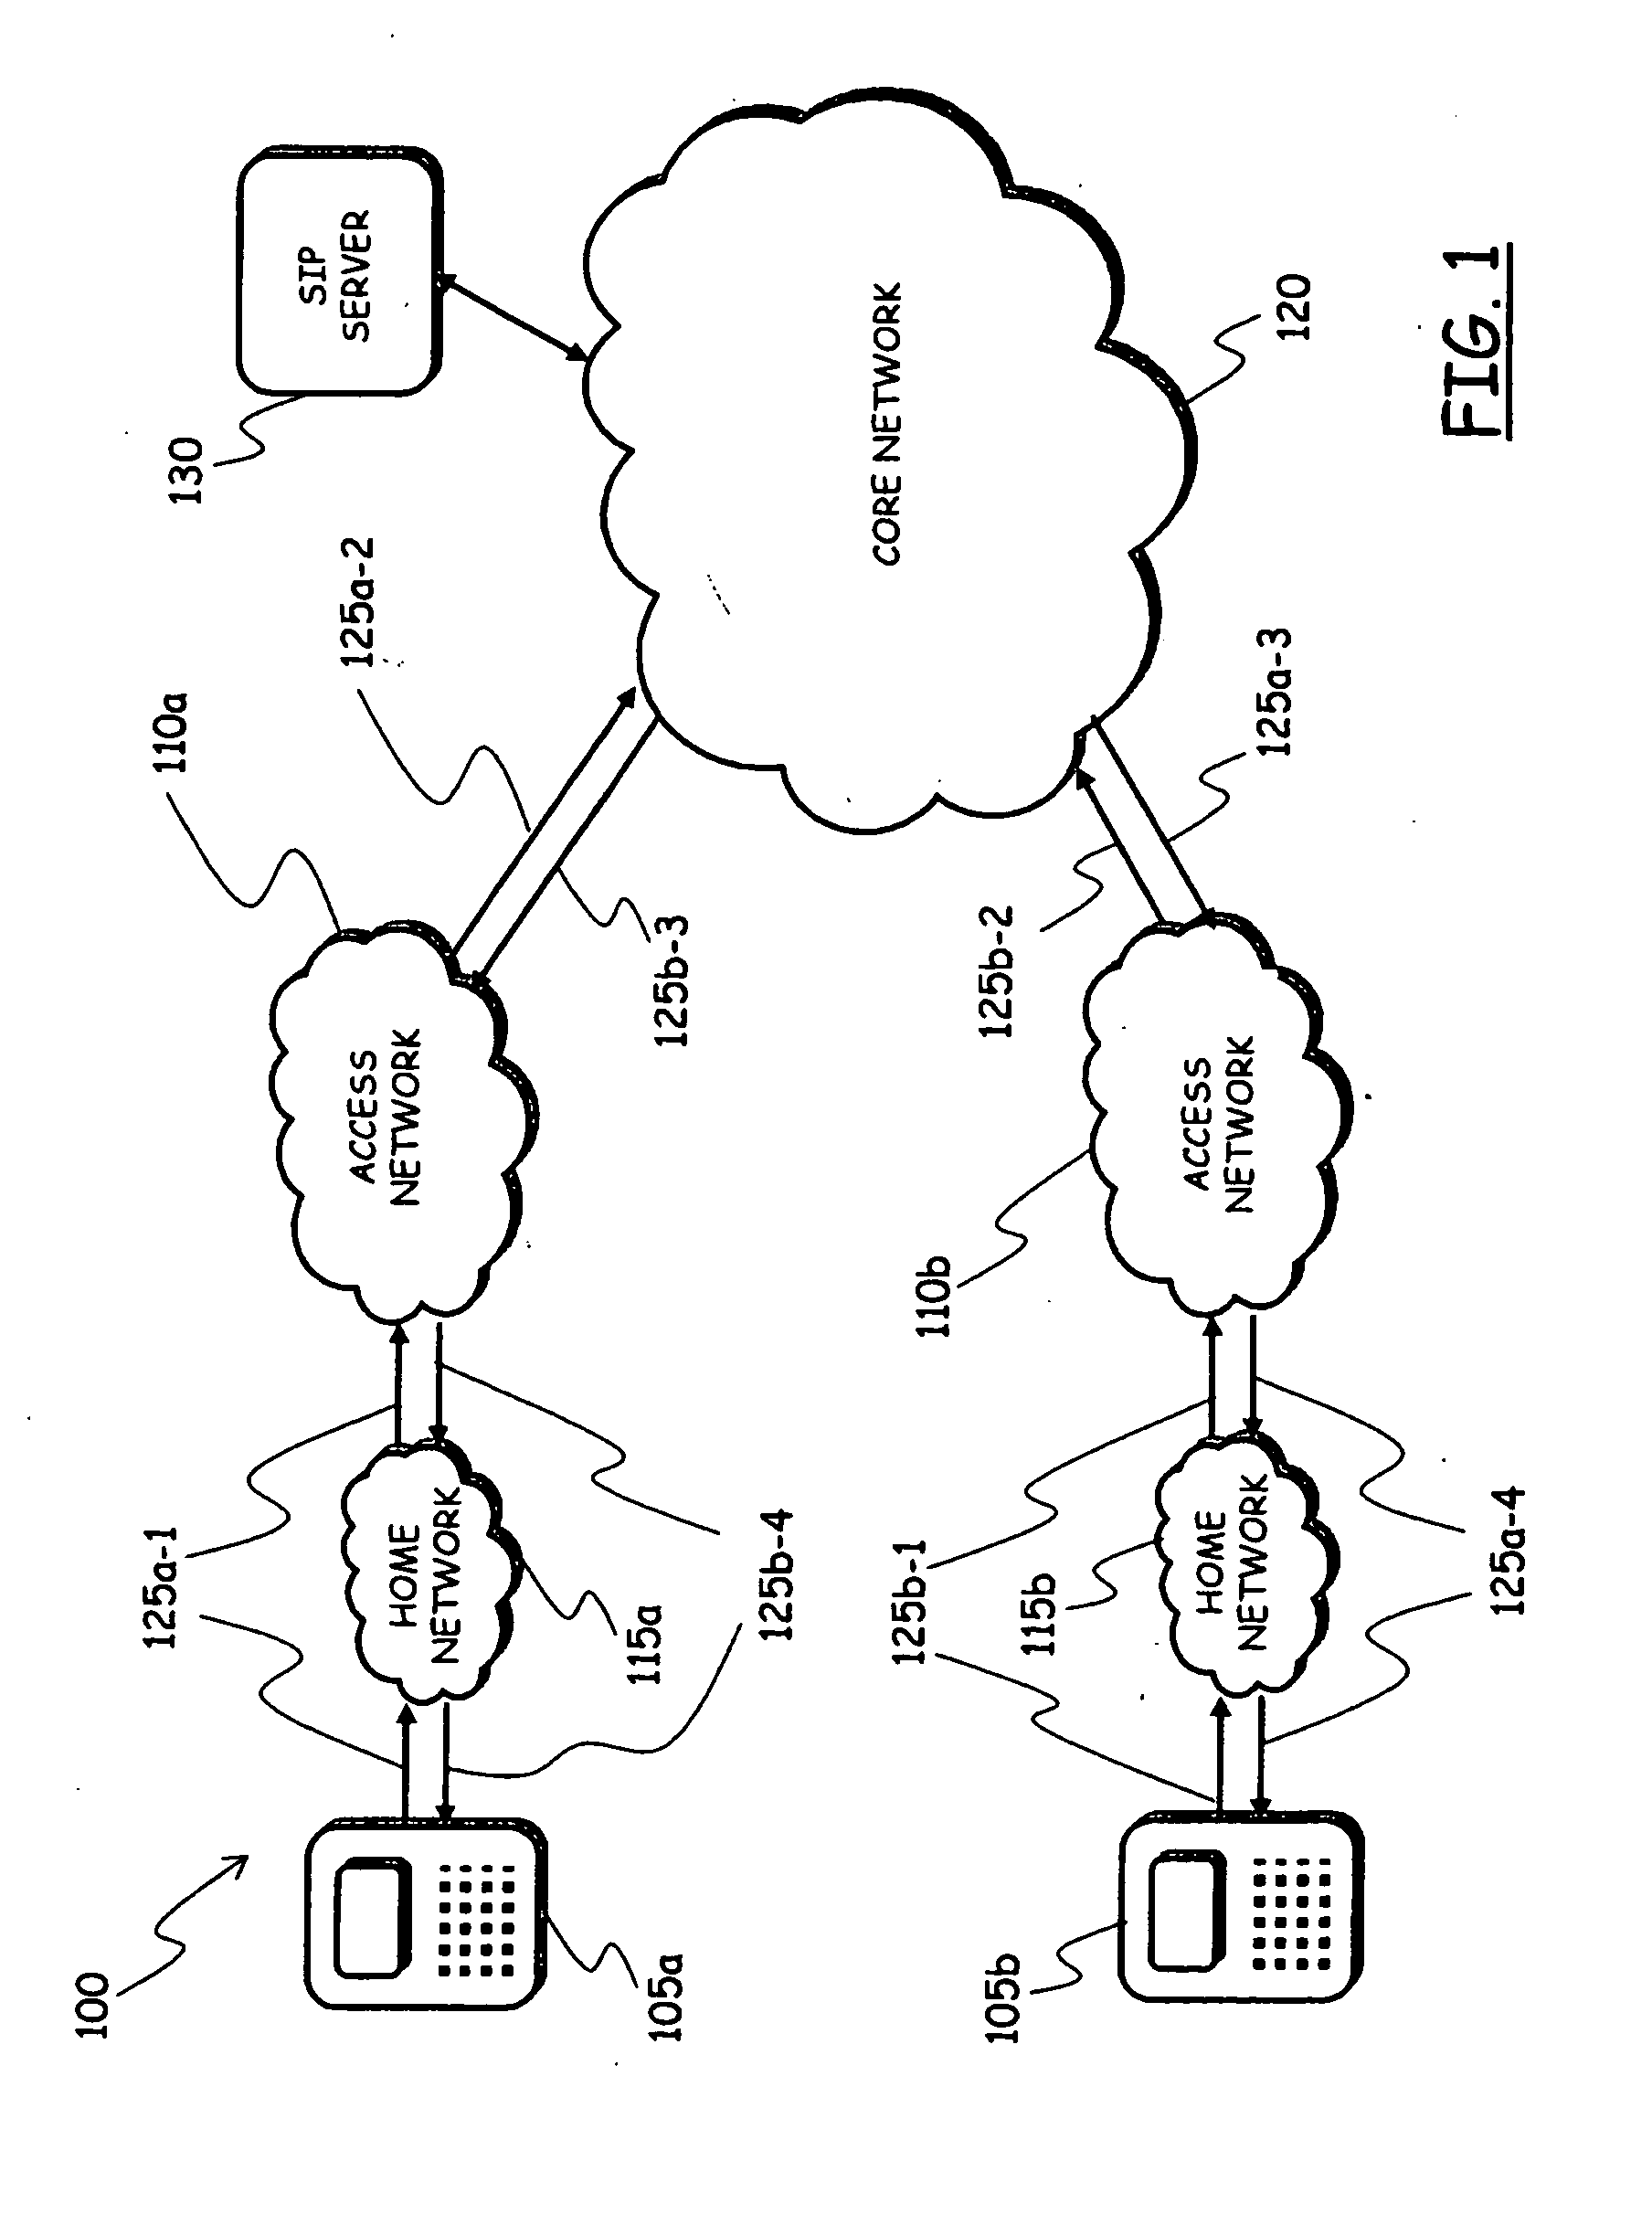 Method and apparatus for improving bandwith exploitation in real-time audio/video communications